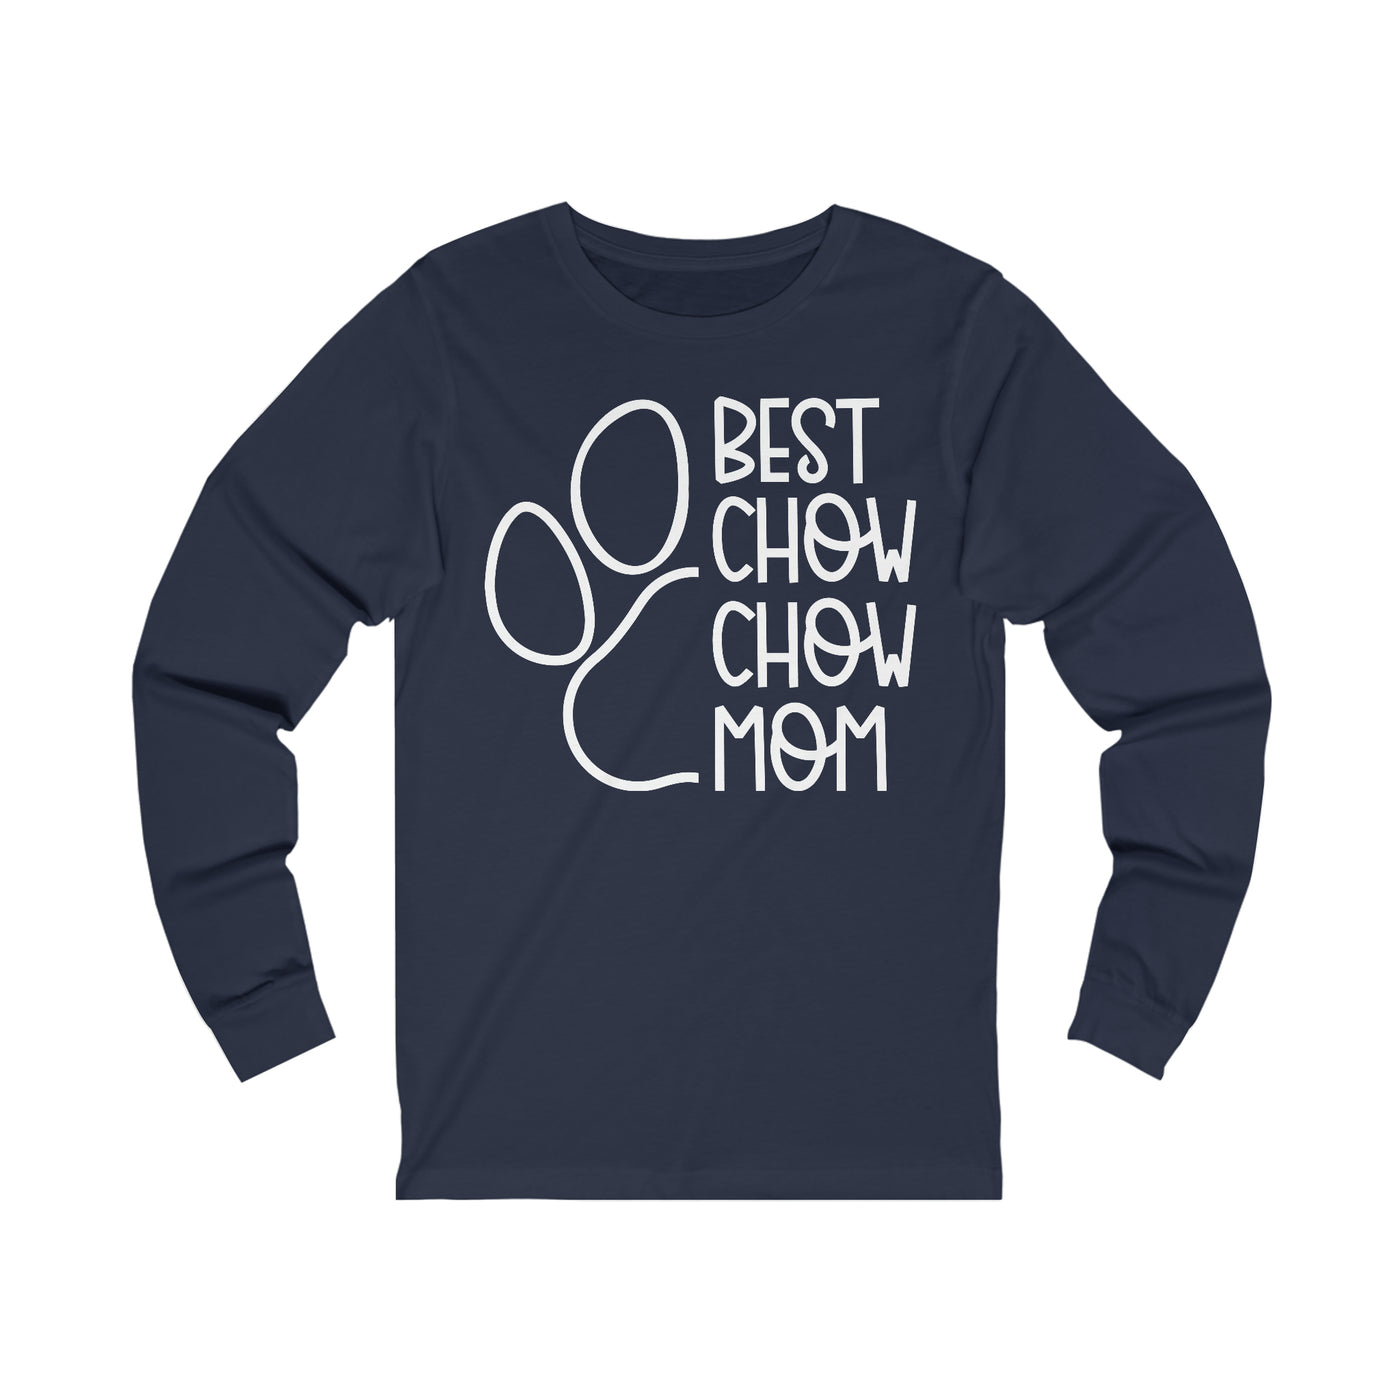 Best Chow Chow Mom Long Sleeves